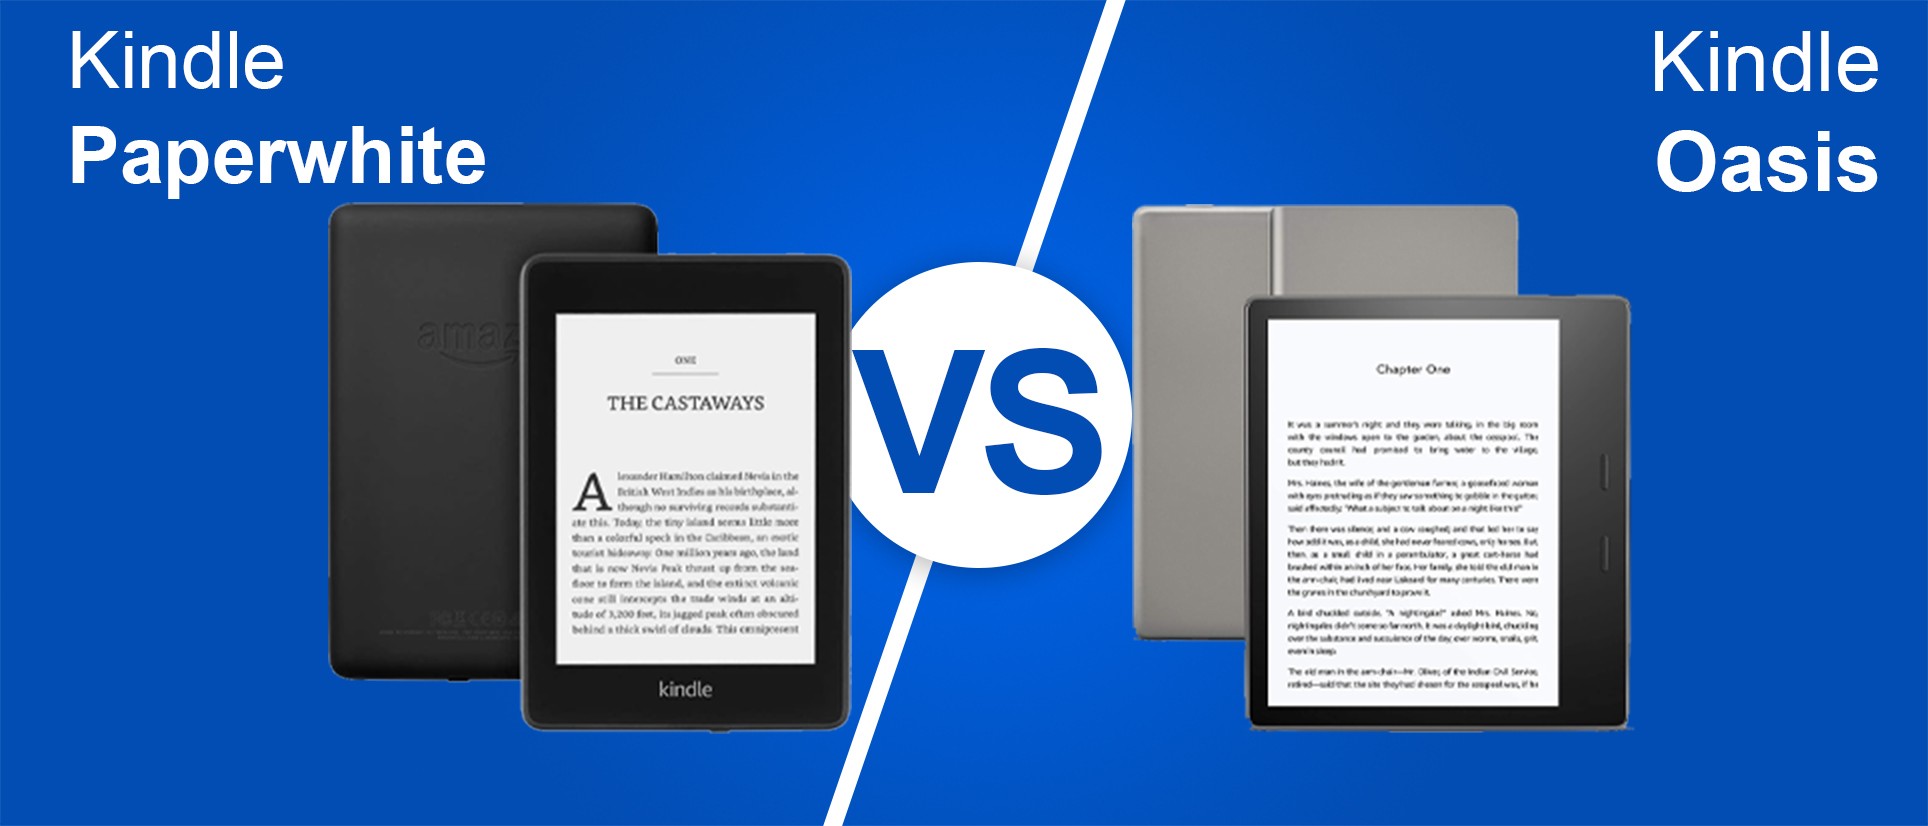 Kindle Paperwhite vs. Kindle Oasis: Which wins? - Daily Mail